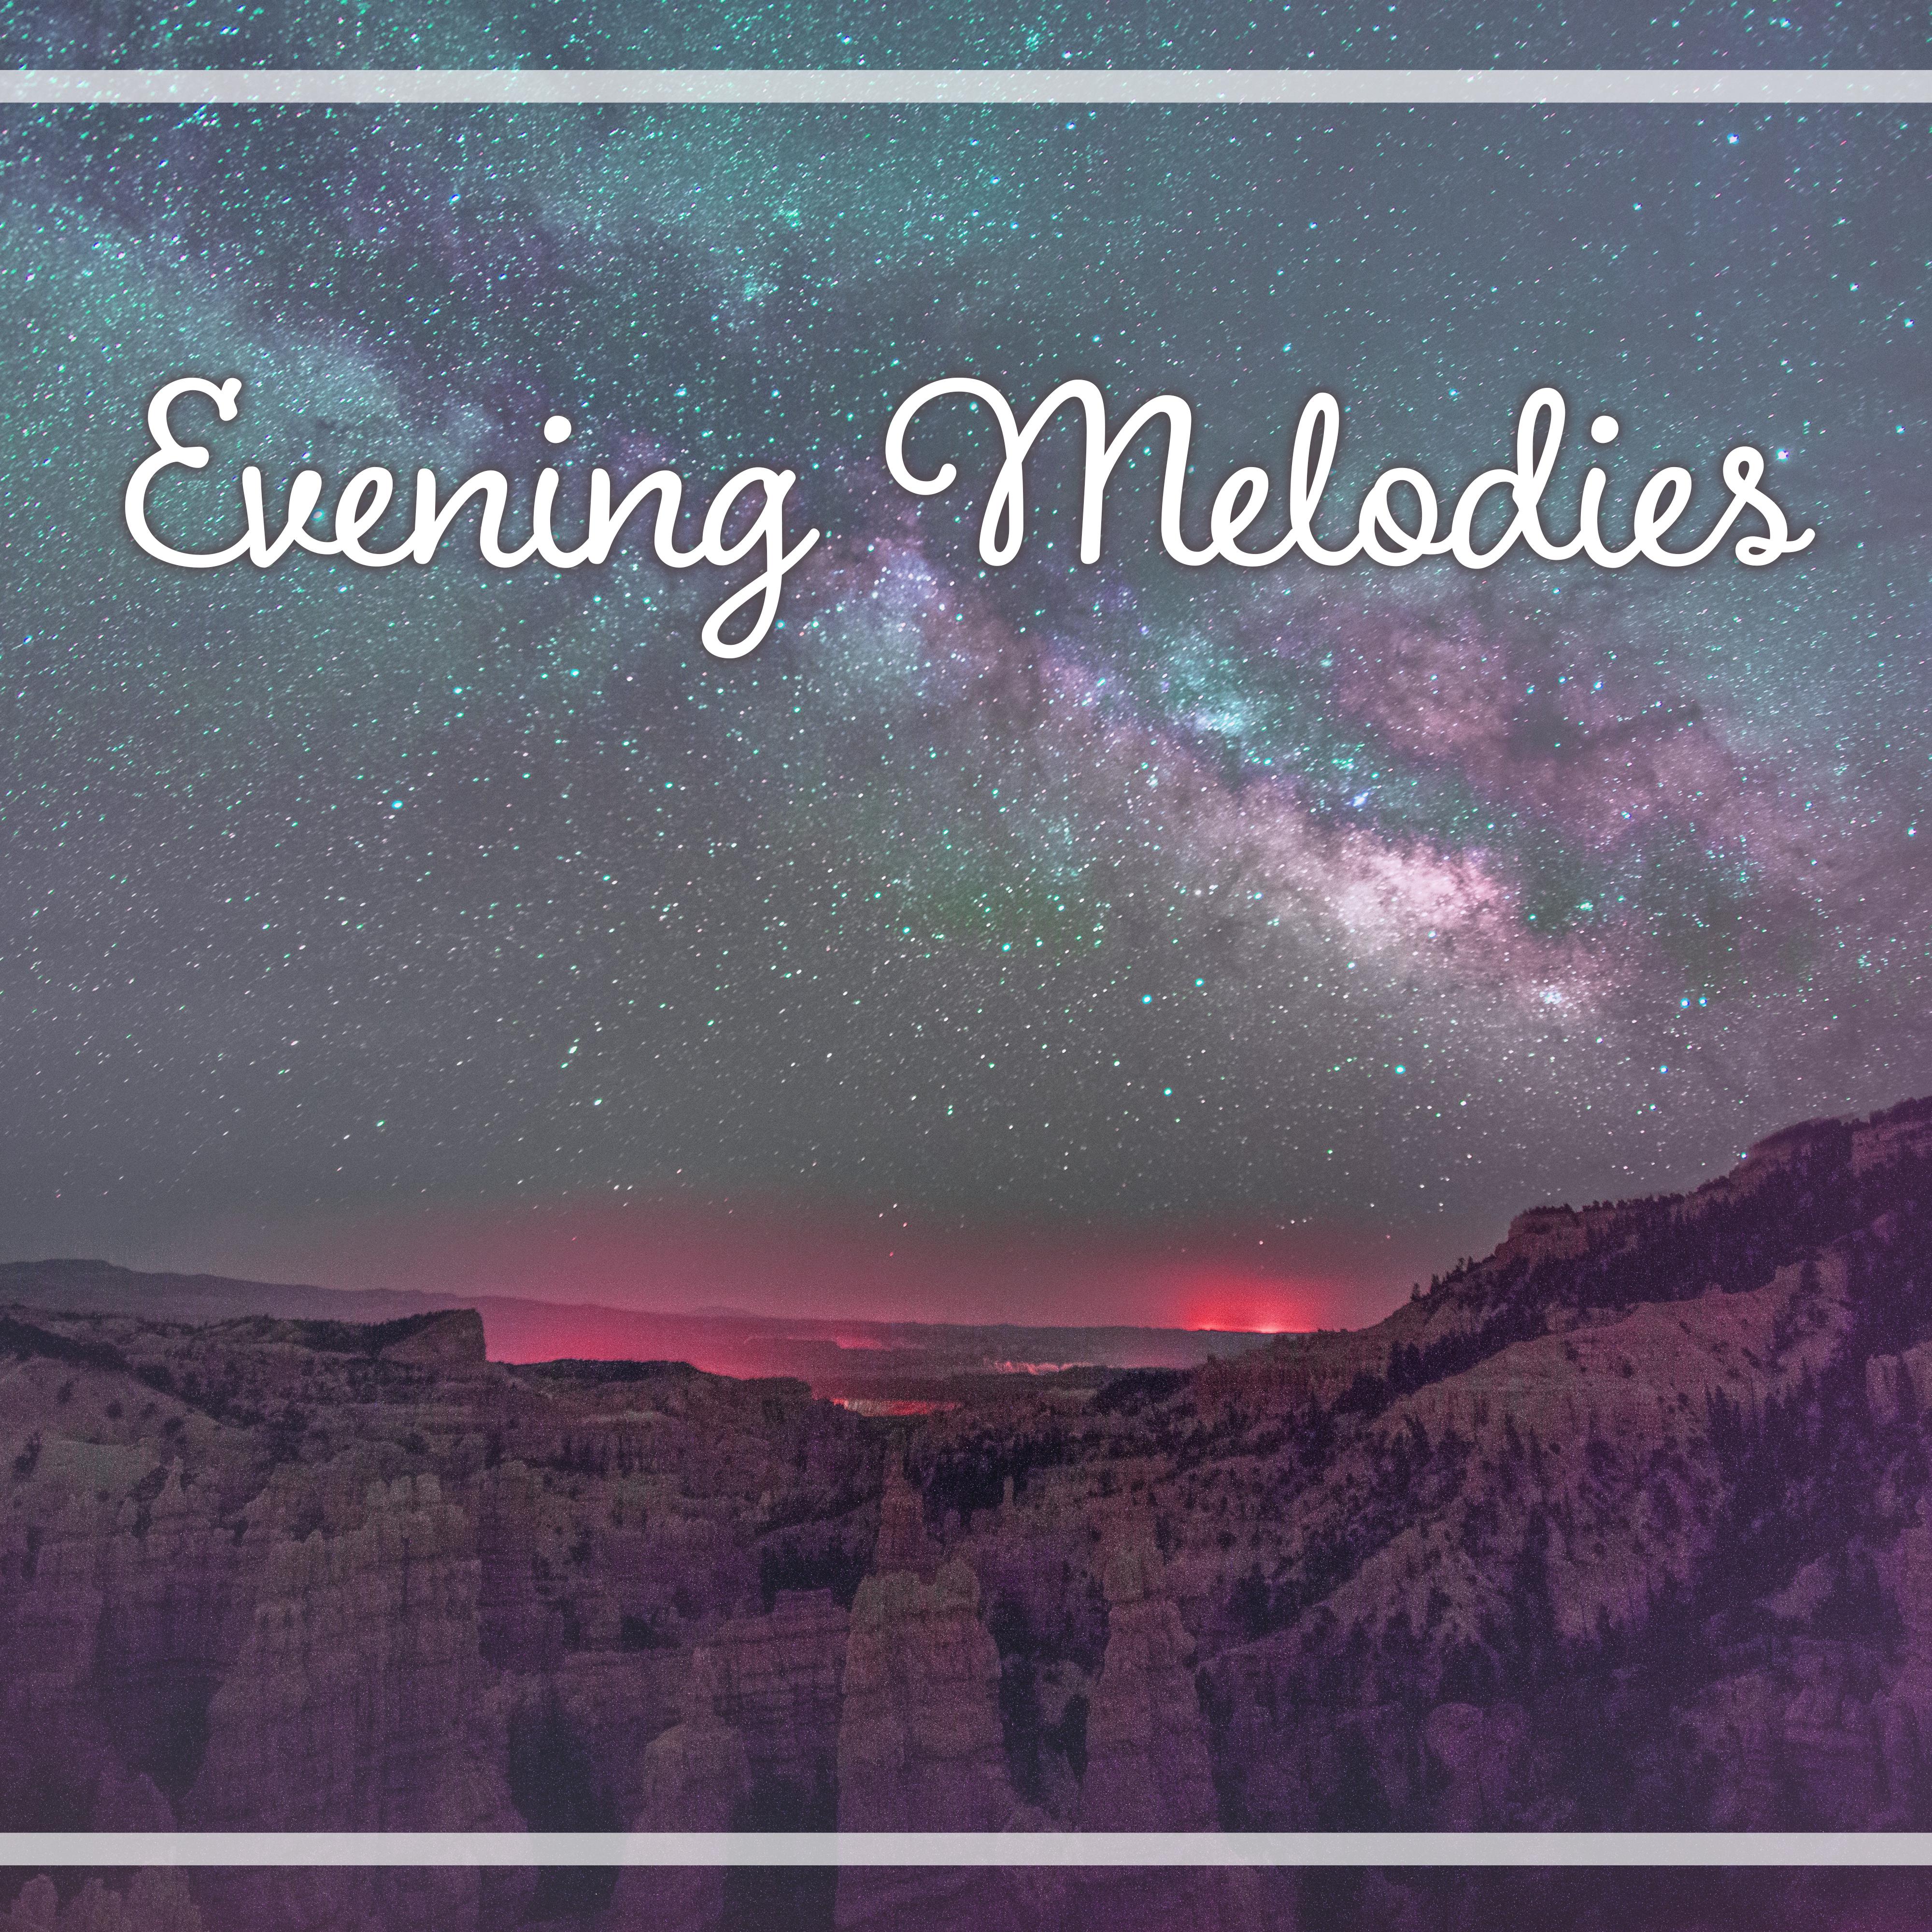 Evening Melodies  Sounds for Sleep, Blissful Sleep, Relaxation Music to Bed, Peaceful Mind, Restful Lullabies, Pillow Music